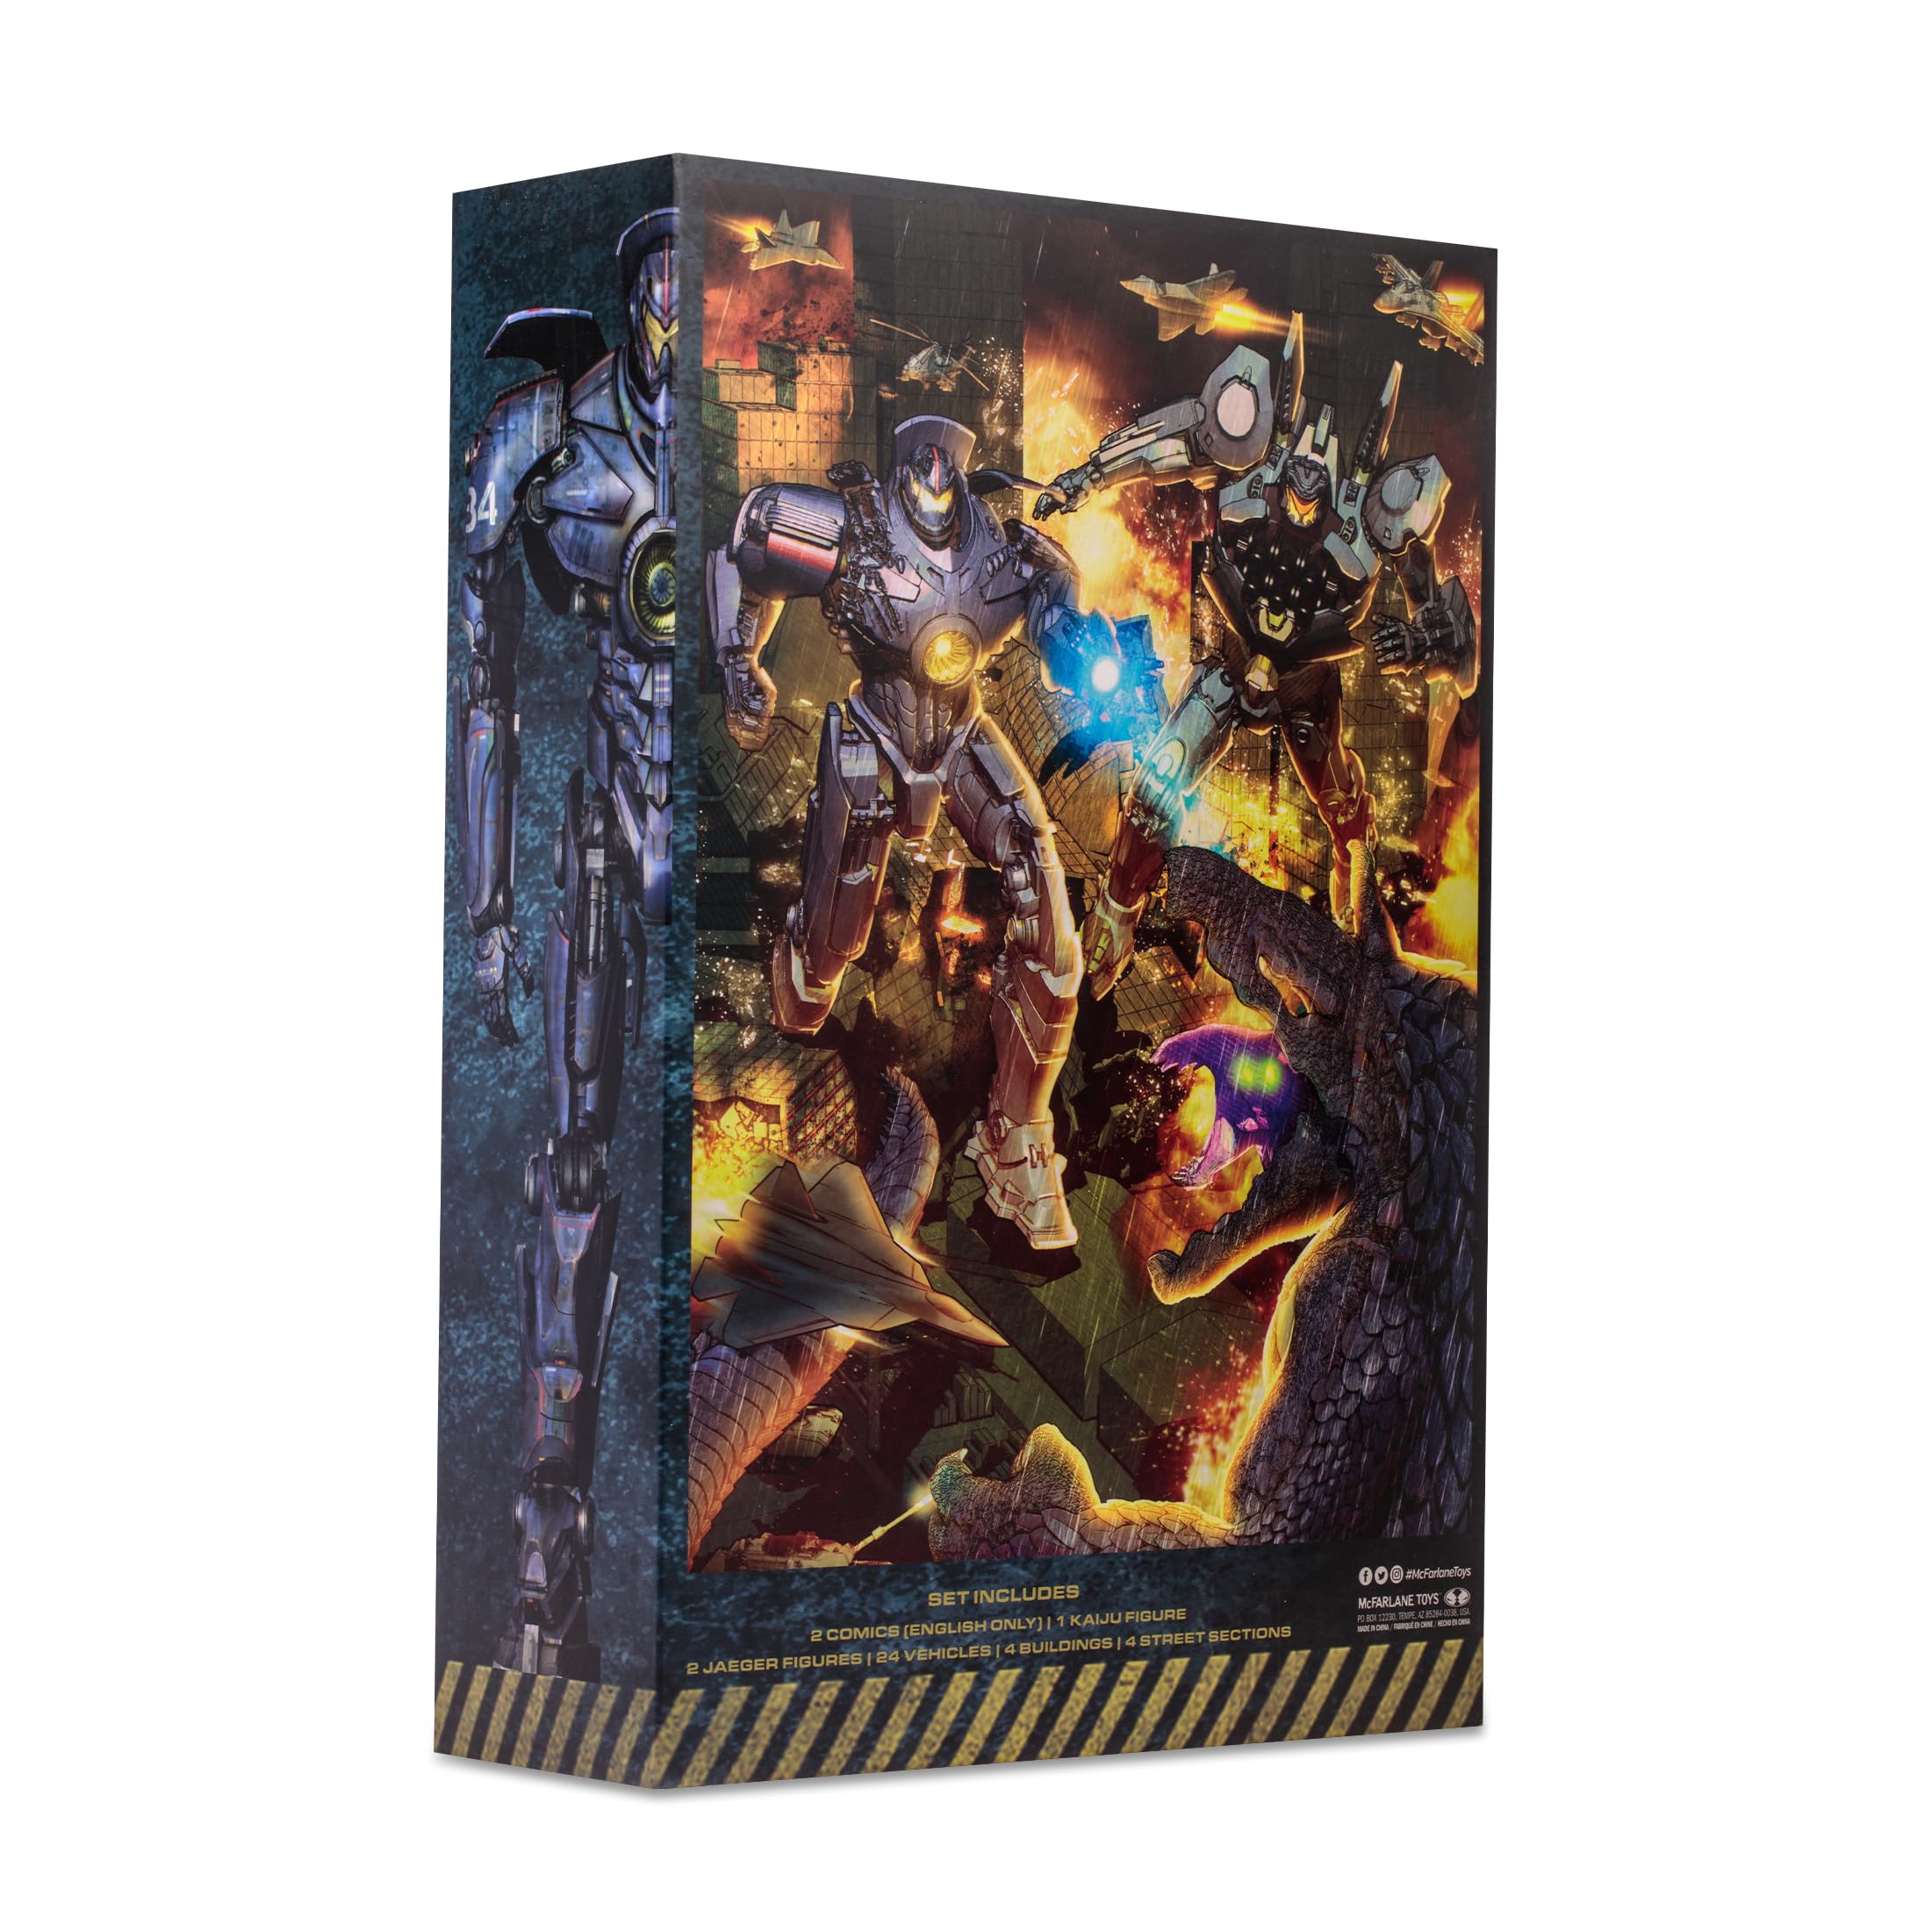 McFarlane Toys - Pacific Rim Starter Pack Playset with Comic, Gold Label, Amazon Exclusive